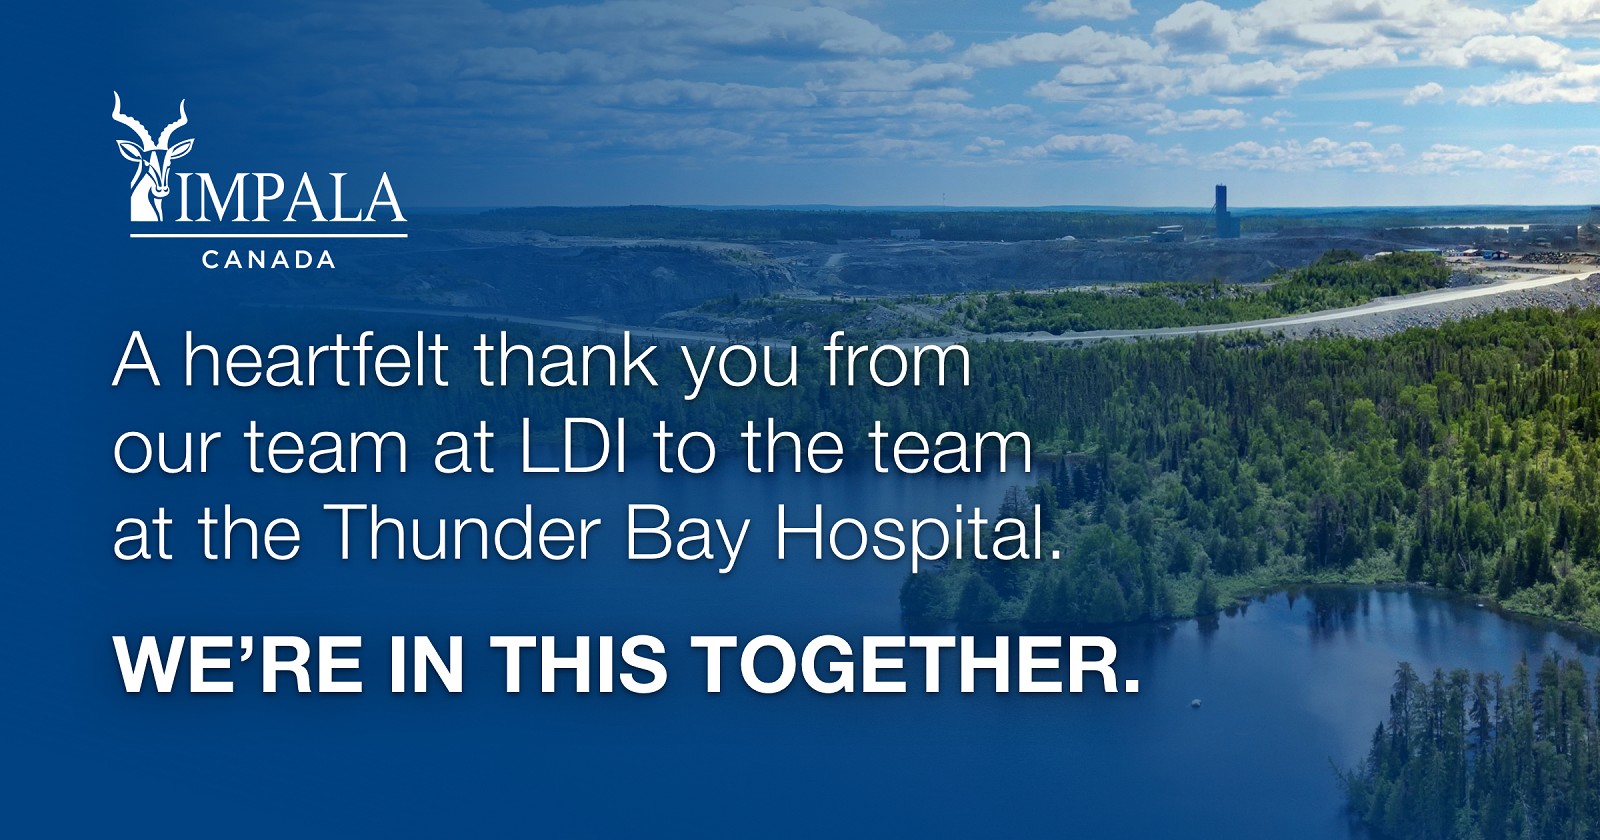 Lac Des Iles Mine Generously Makes $25,000 Donation to COVID-19 Response Fund